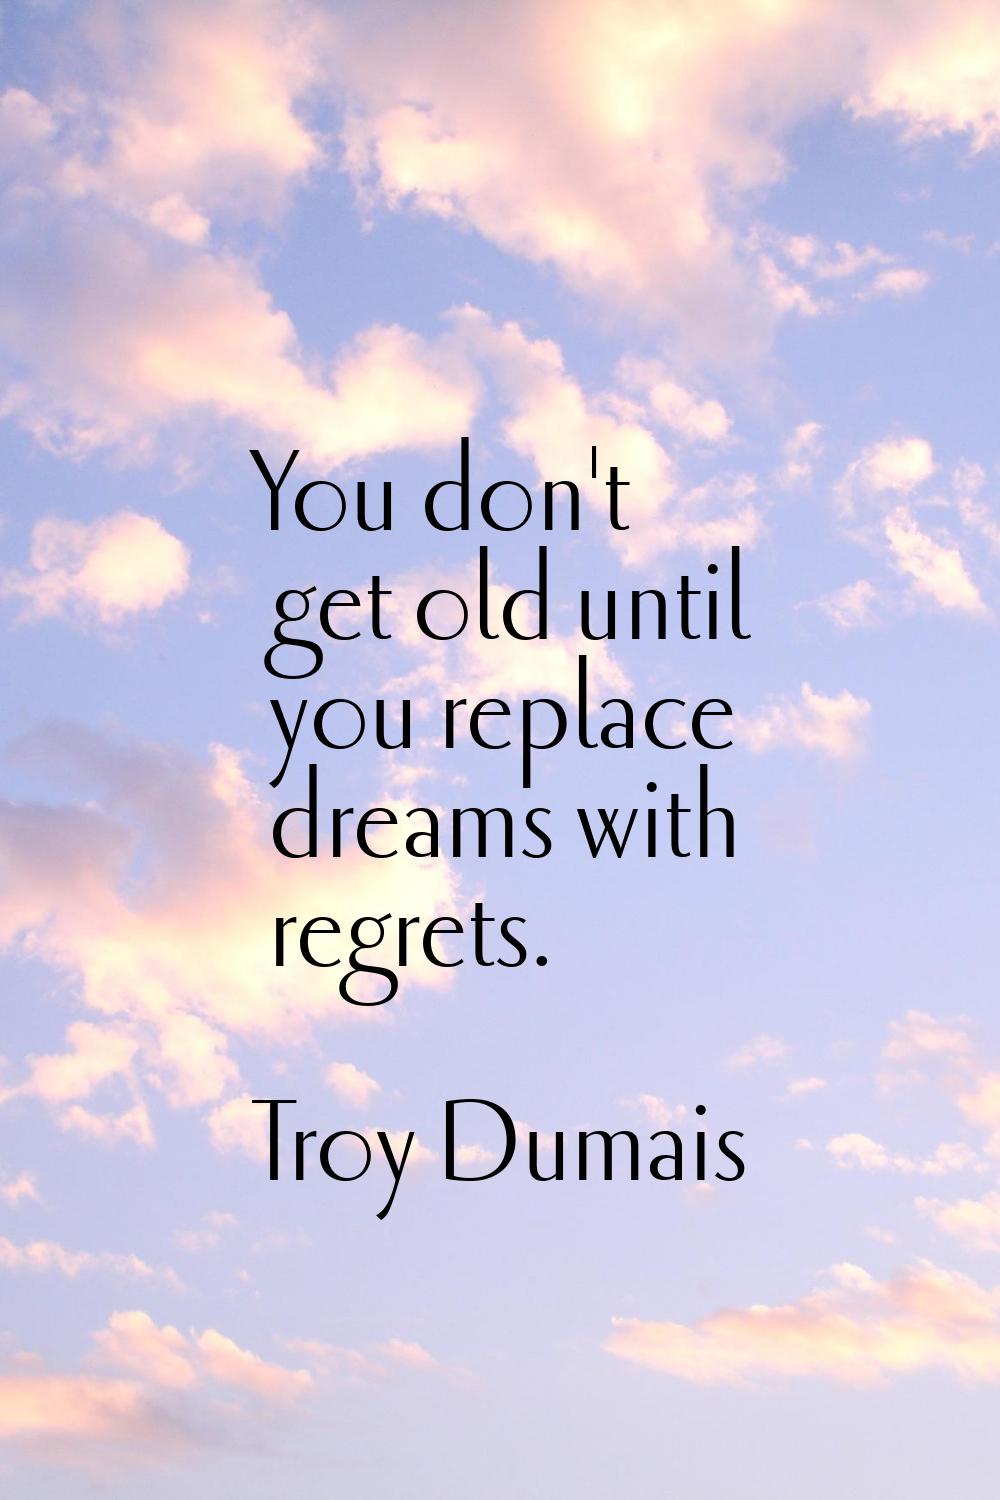 You don't get old until you replace dreams with regrets.